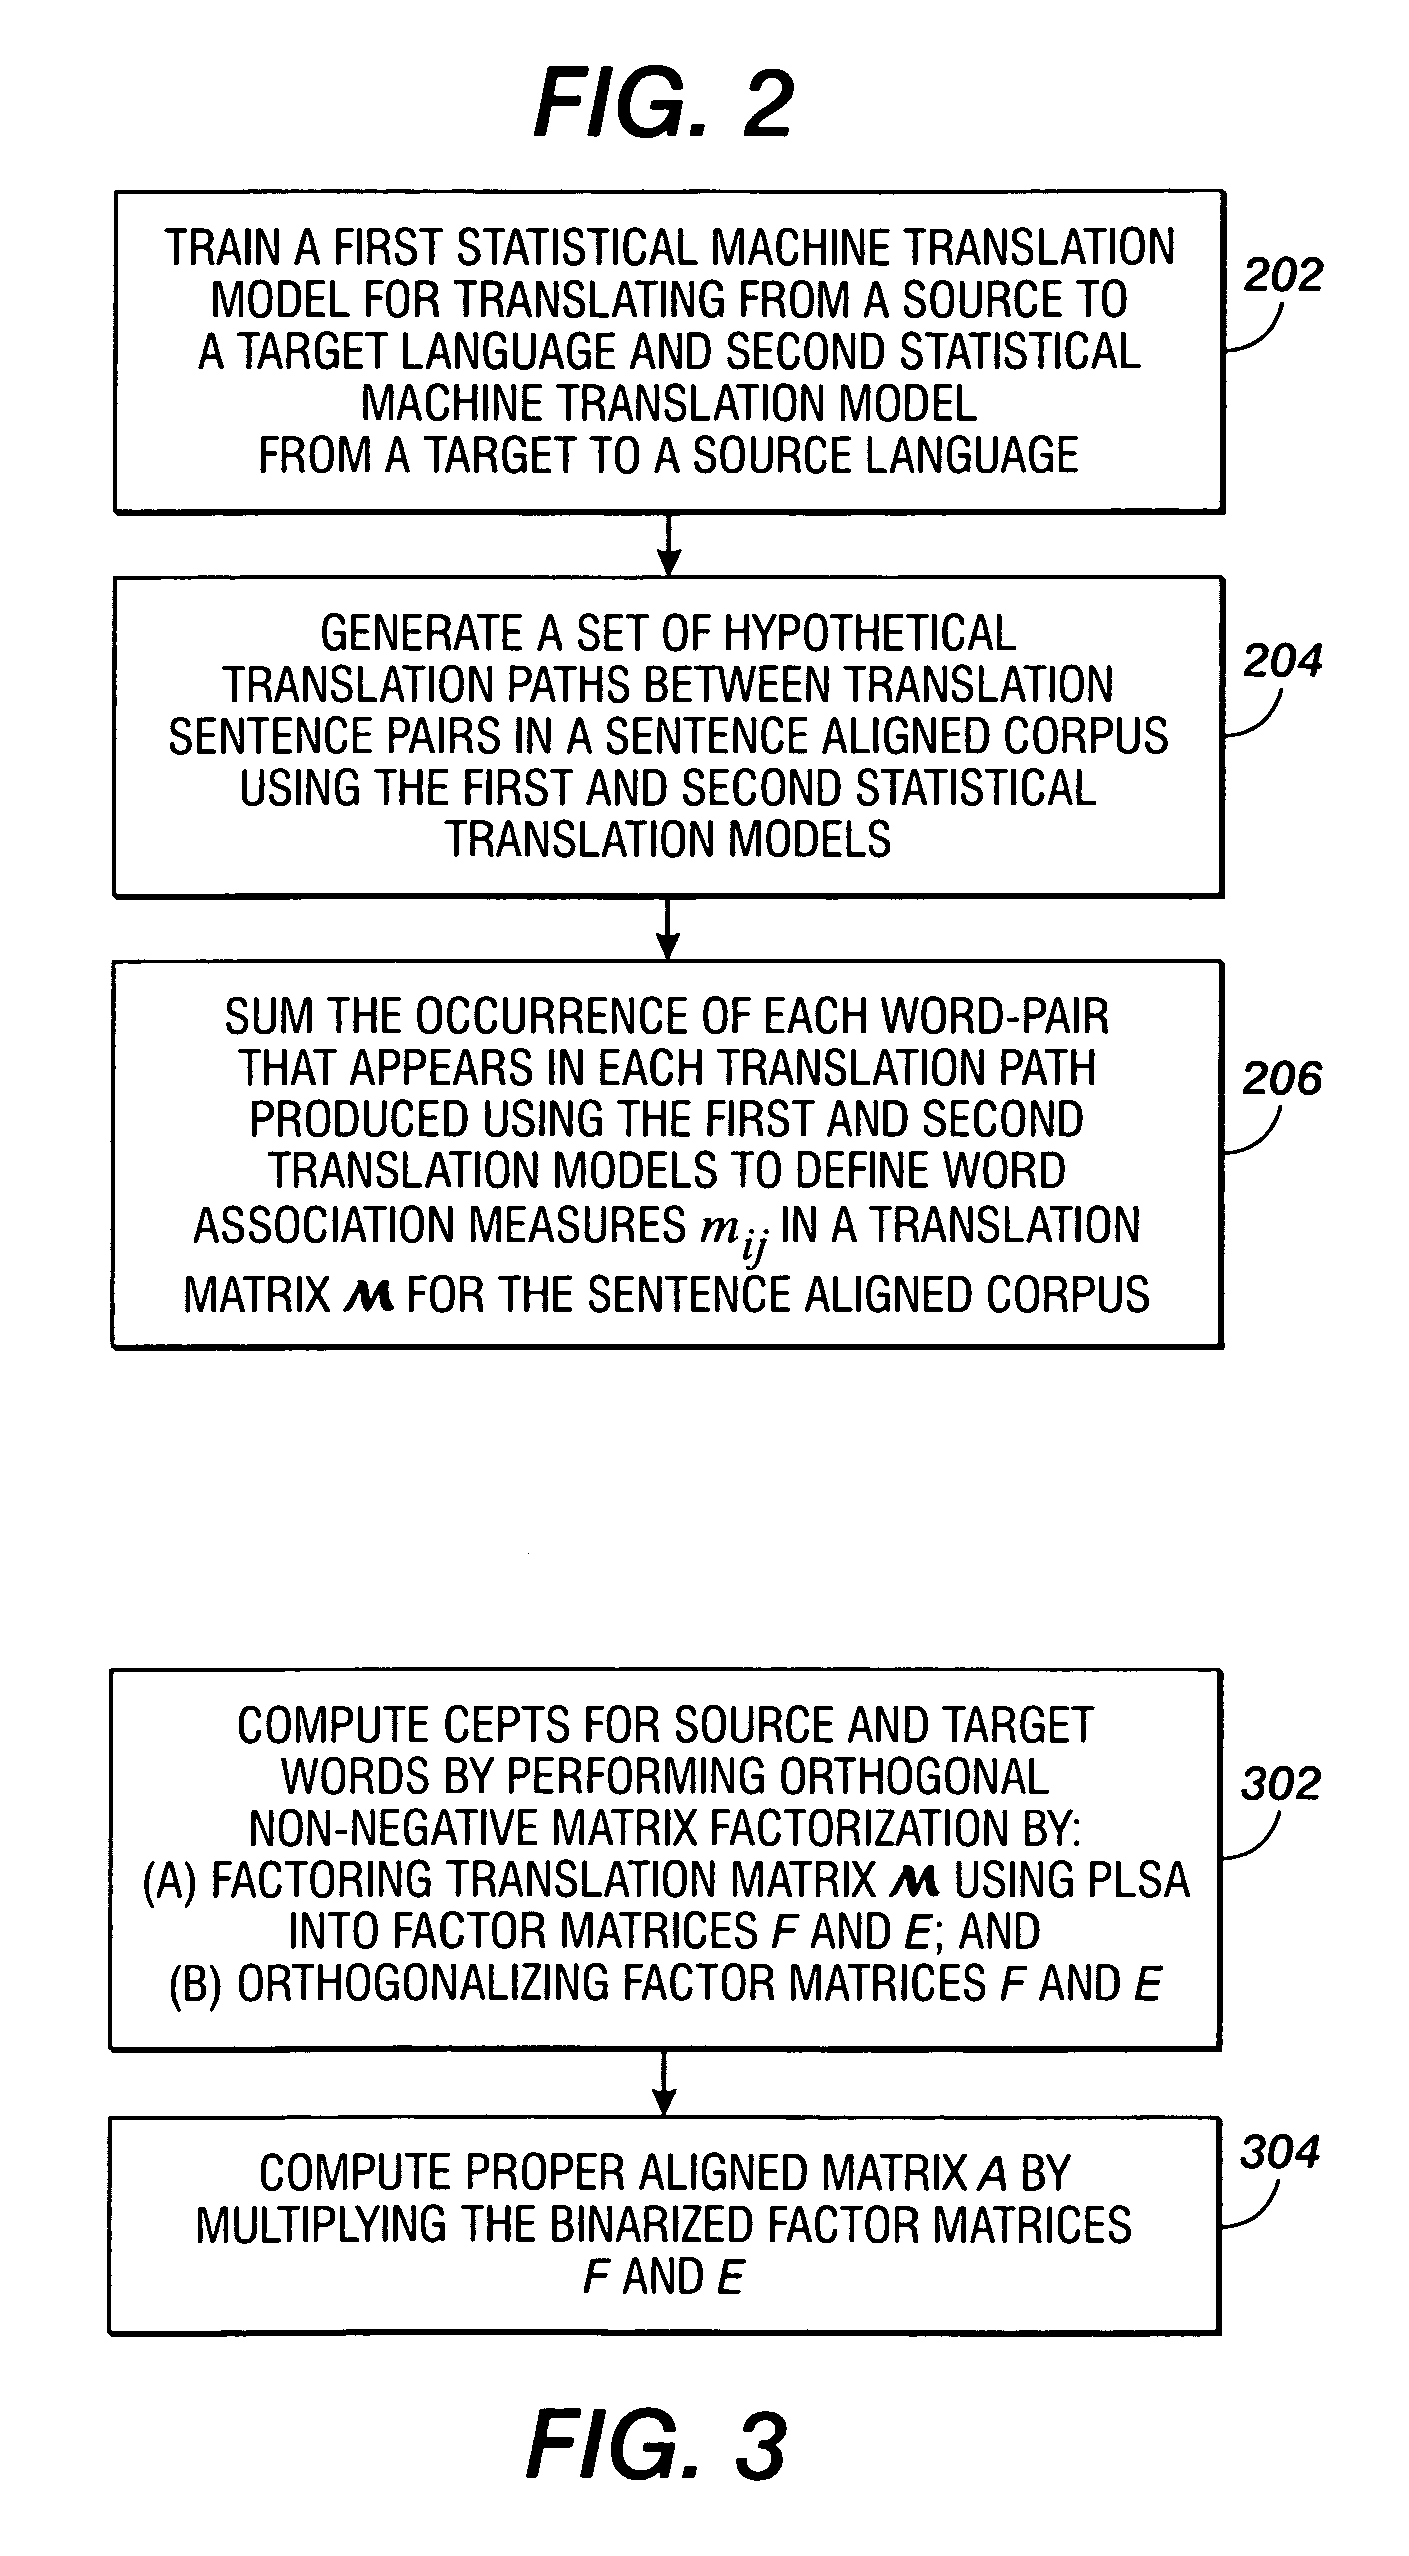 Apparatus and methods for aligning words in bilingual sentences